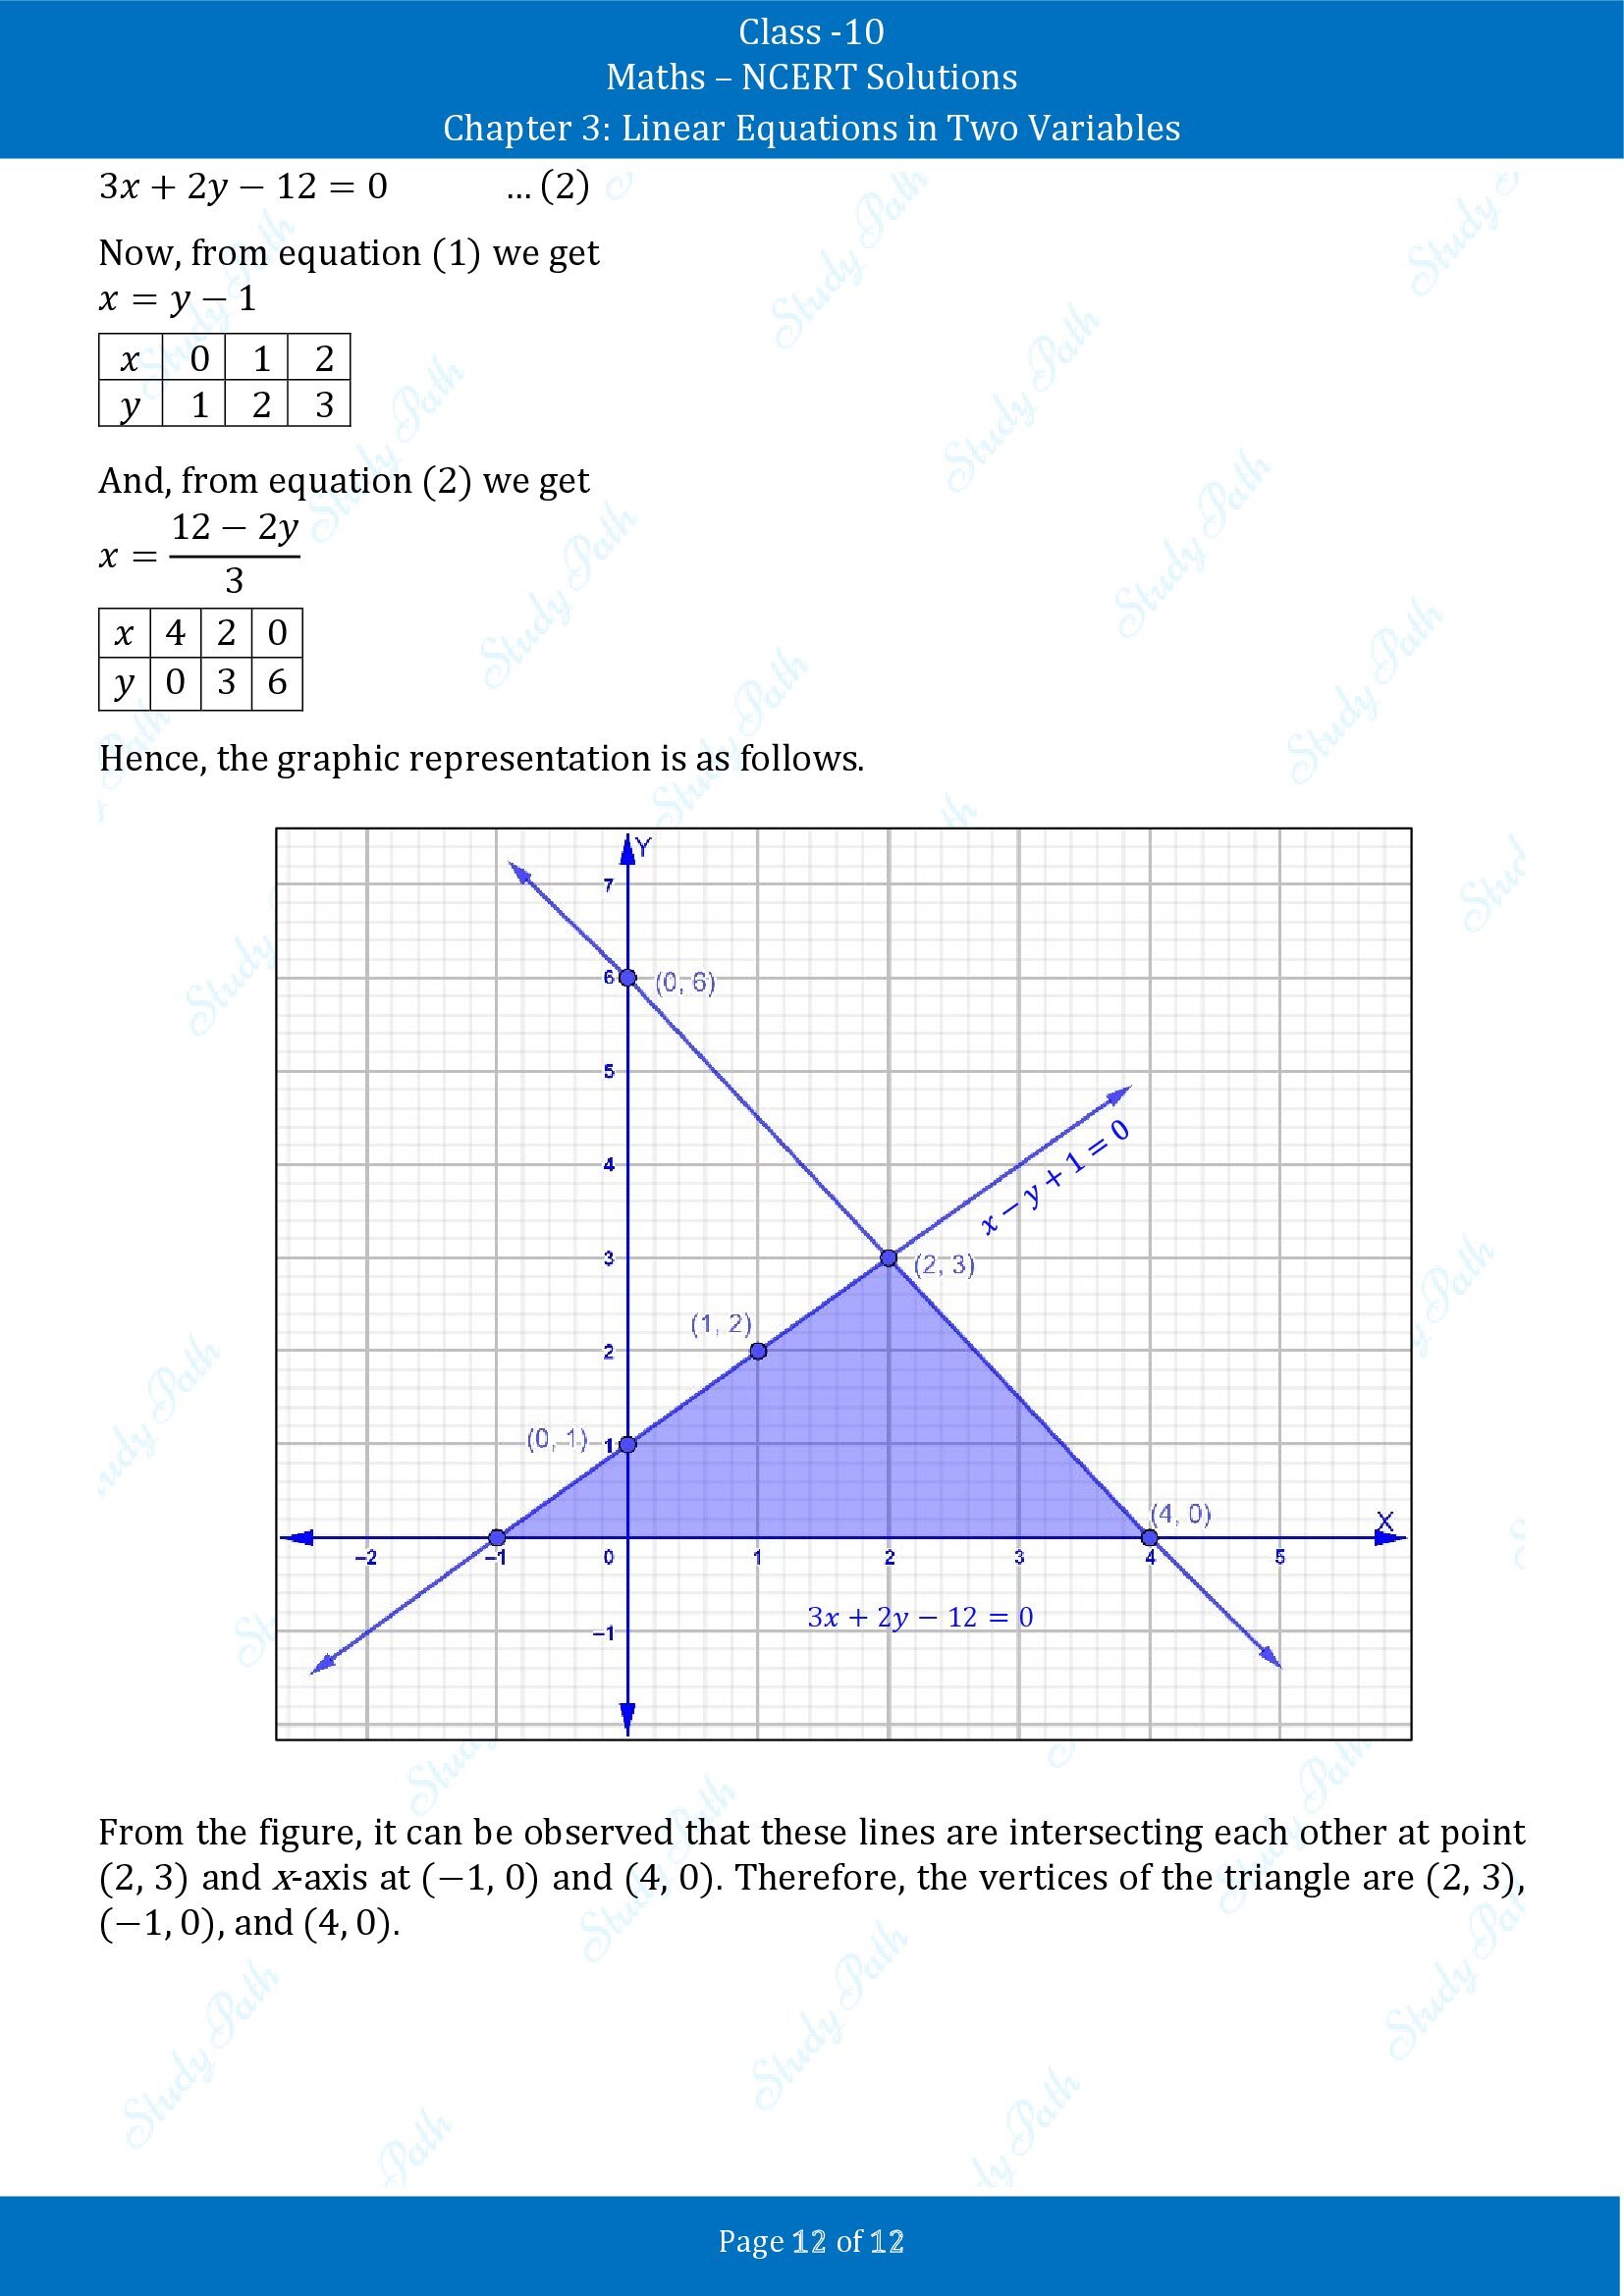 NCERT Solutions for Class 10 Maths Chapter 3 Linear Equations in Two Variables Exercise 3.2 00012